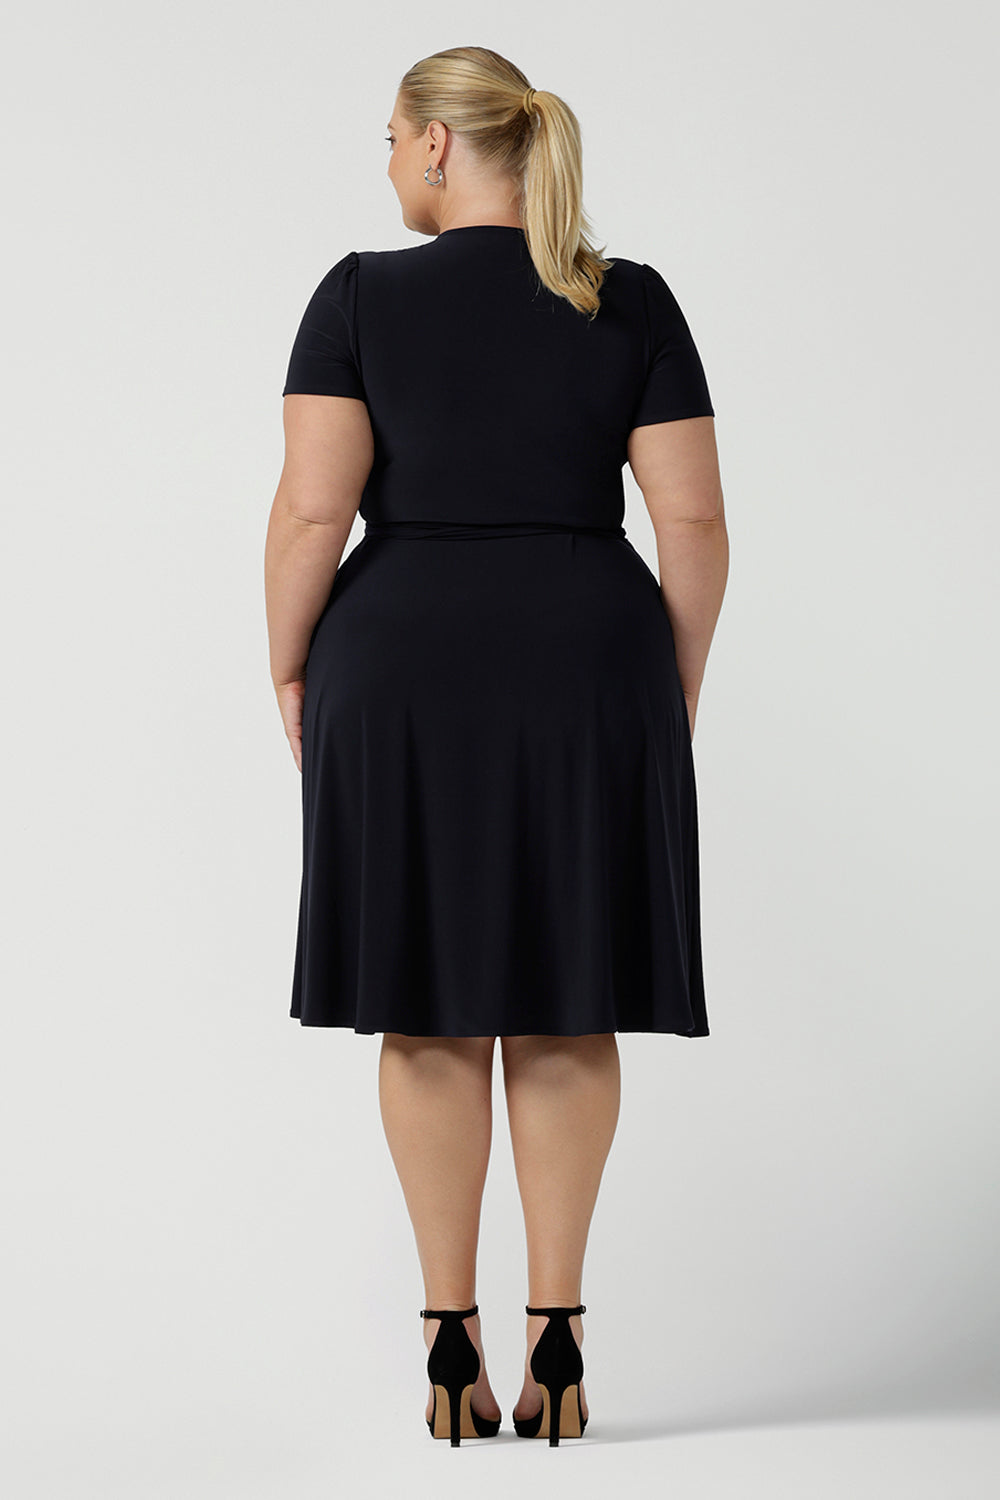 Back view of a curvy, size 18 woman wearing a navy, wrap dress with short sleeves. A great dress for summer casual wear, or for travel. Shop made in Australia dresses in petite to plus sizes online at Australian fashion brand, Leina & Fleur.